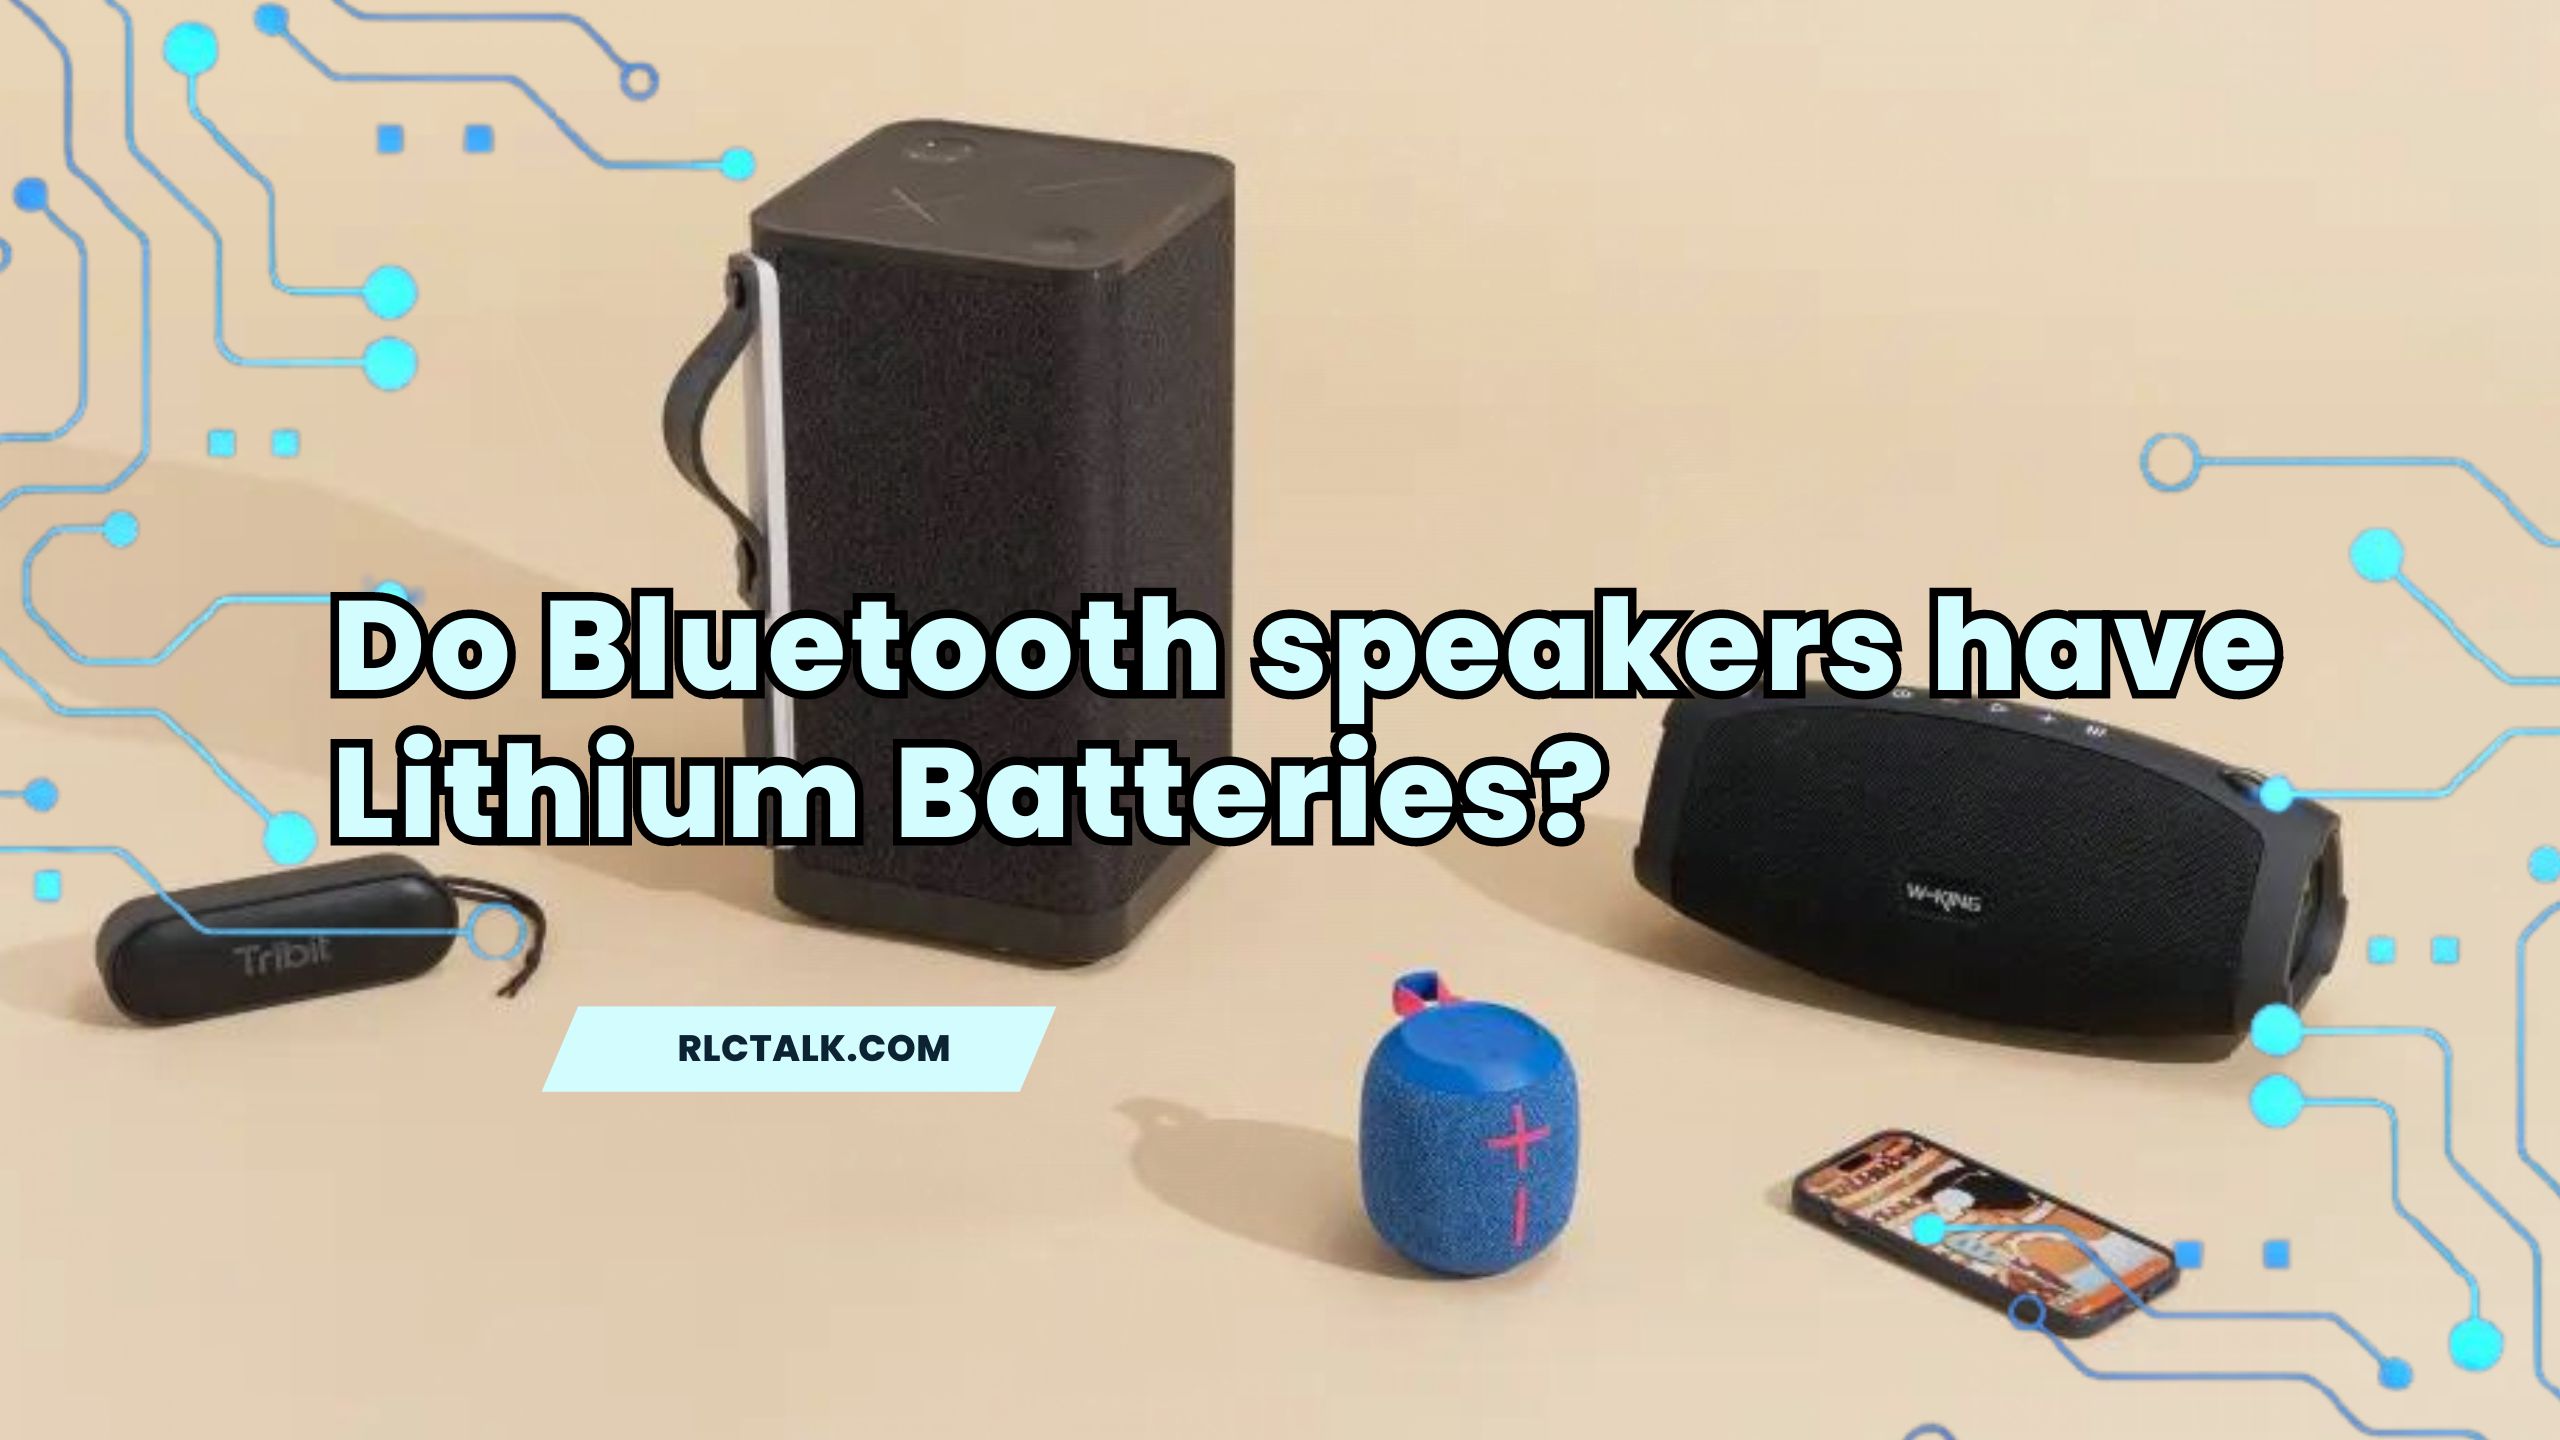 Do Bluetooth speakers have Lithium Batteries